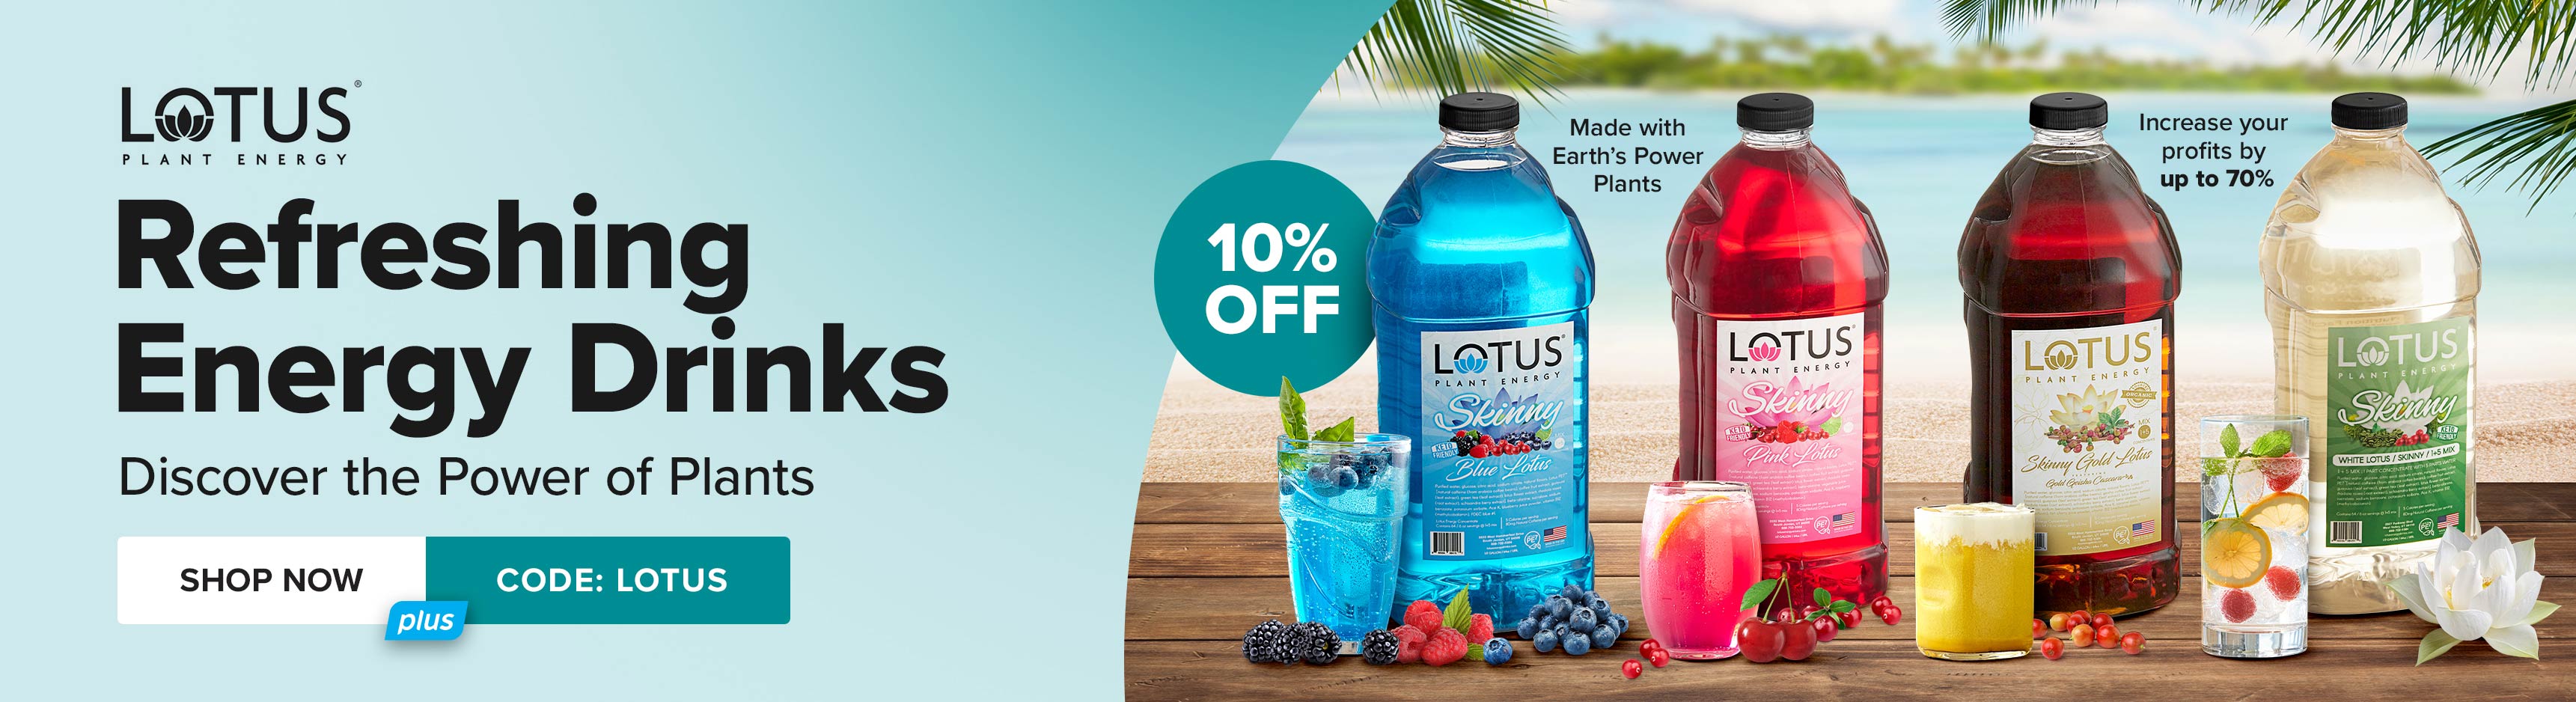 10% Off Lotus Refreshing Energy Drinks, Discover the Power of Plants, use code: LOTUS